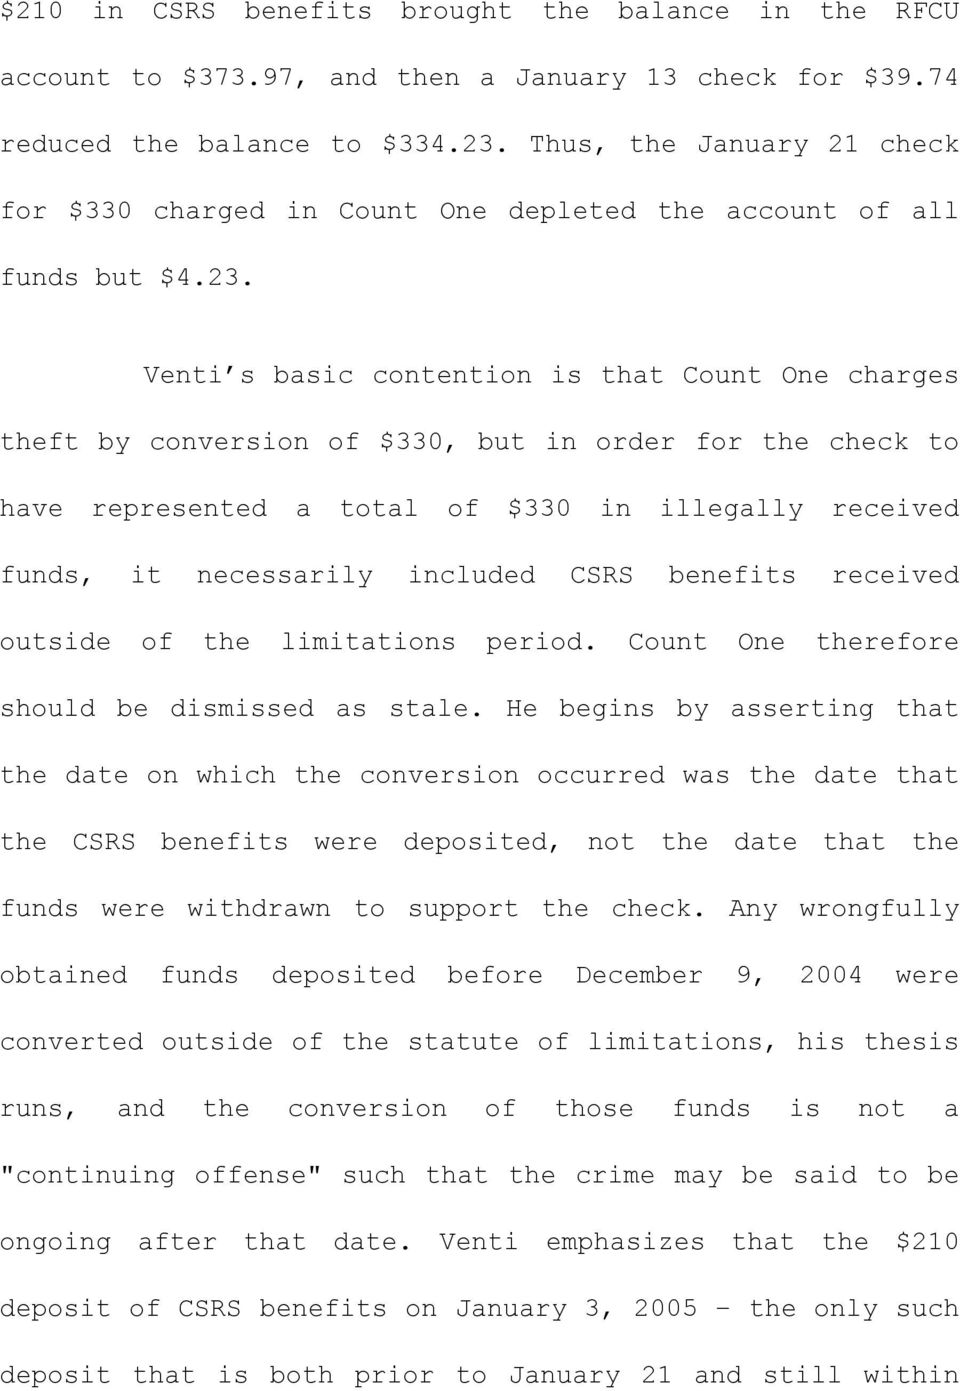 Venti s basic contention is that Count One charges theft by conversion of $330, but in order for the check to have represented a total of $330 in illegally received funds, it necessarily included